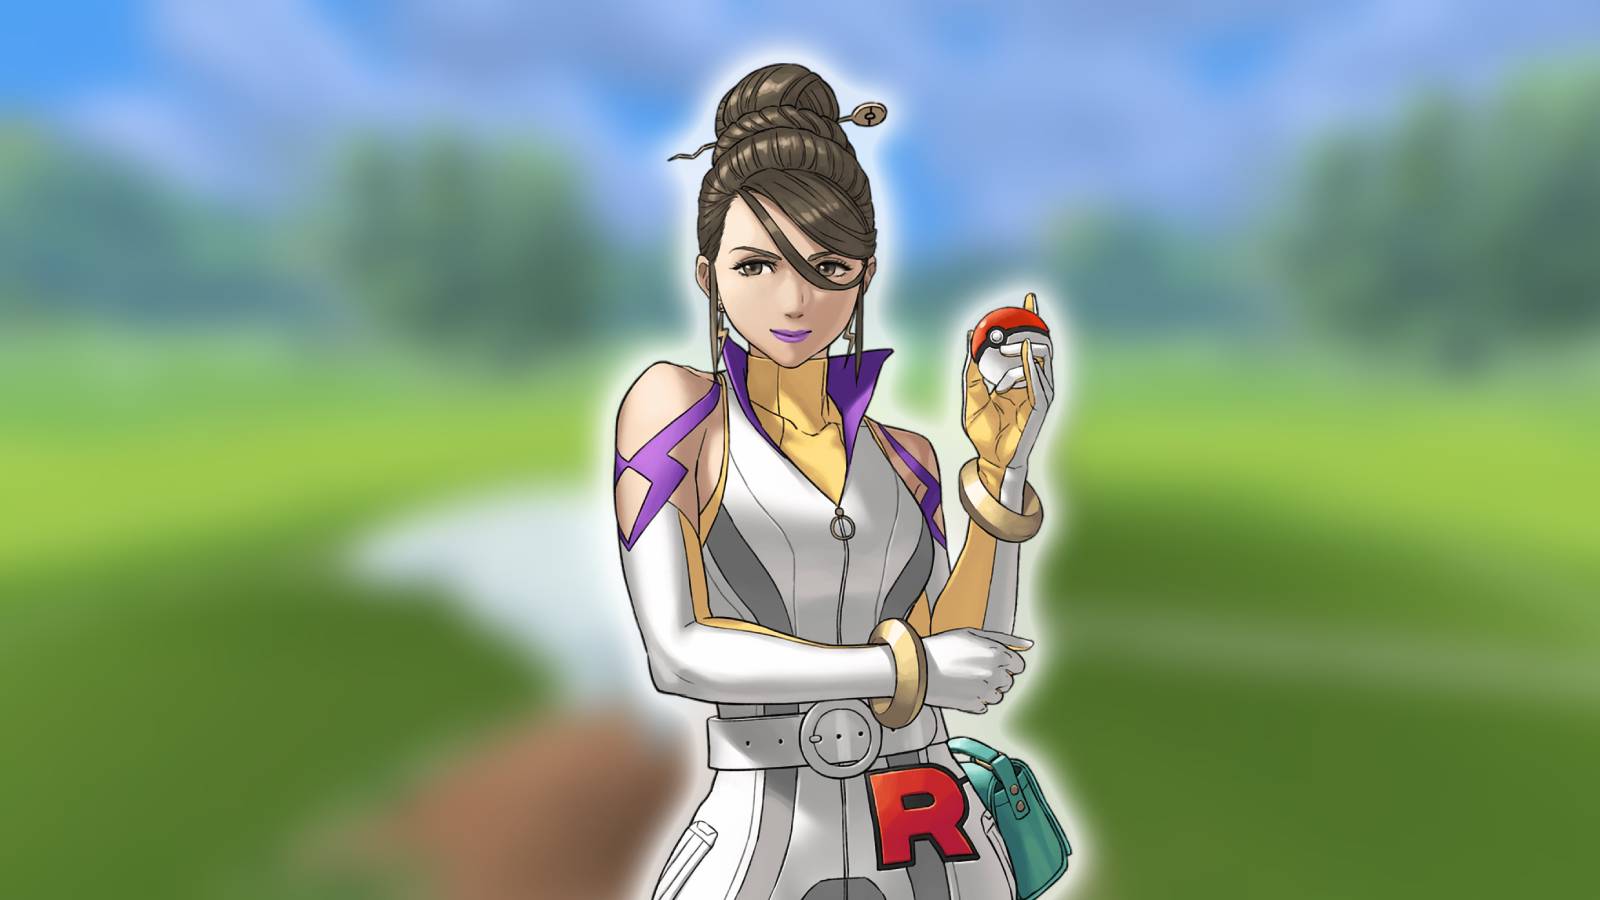 The Pokemon Go Team Rocket Leader Sierra is visible against a blurred screenshot from Pokemon Go